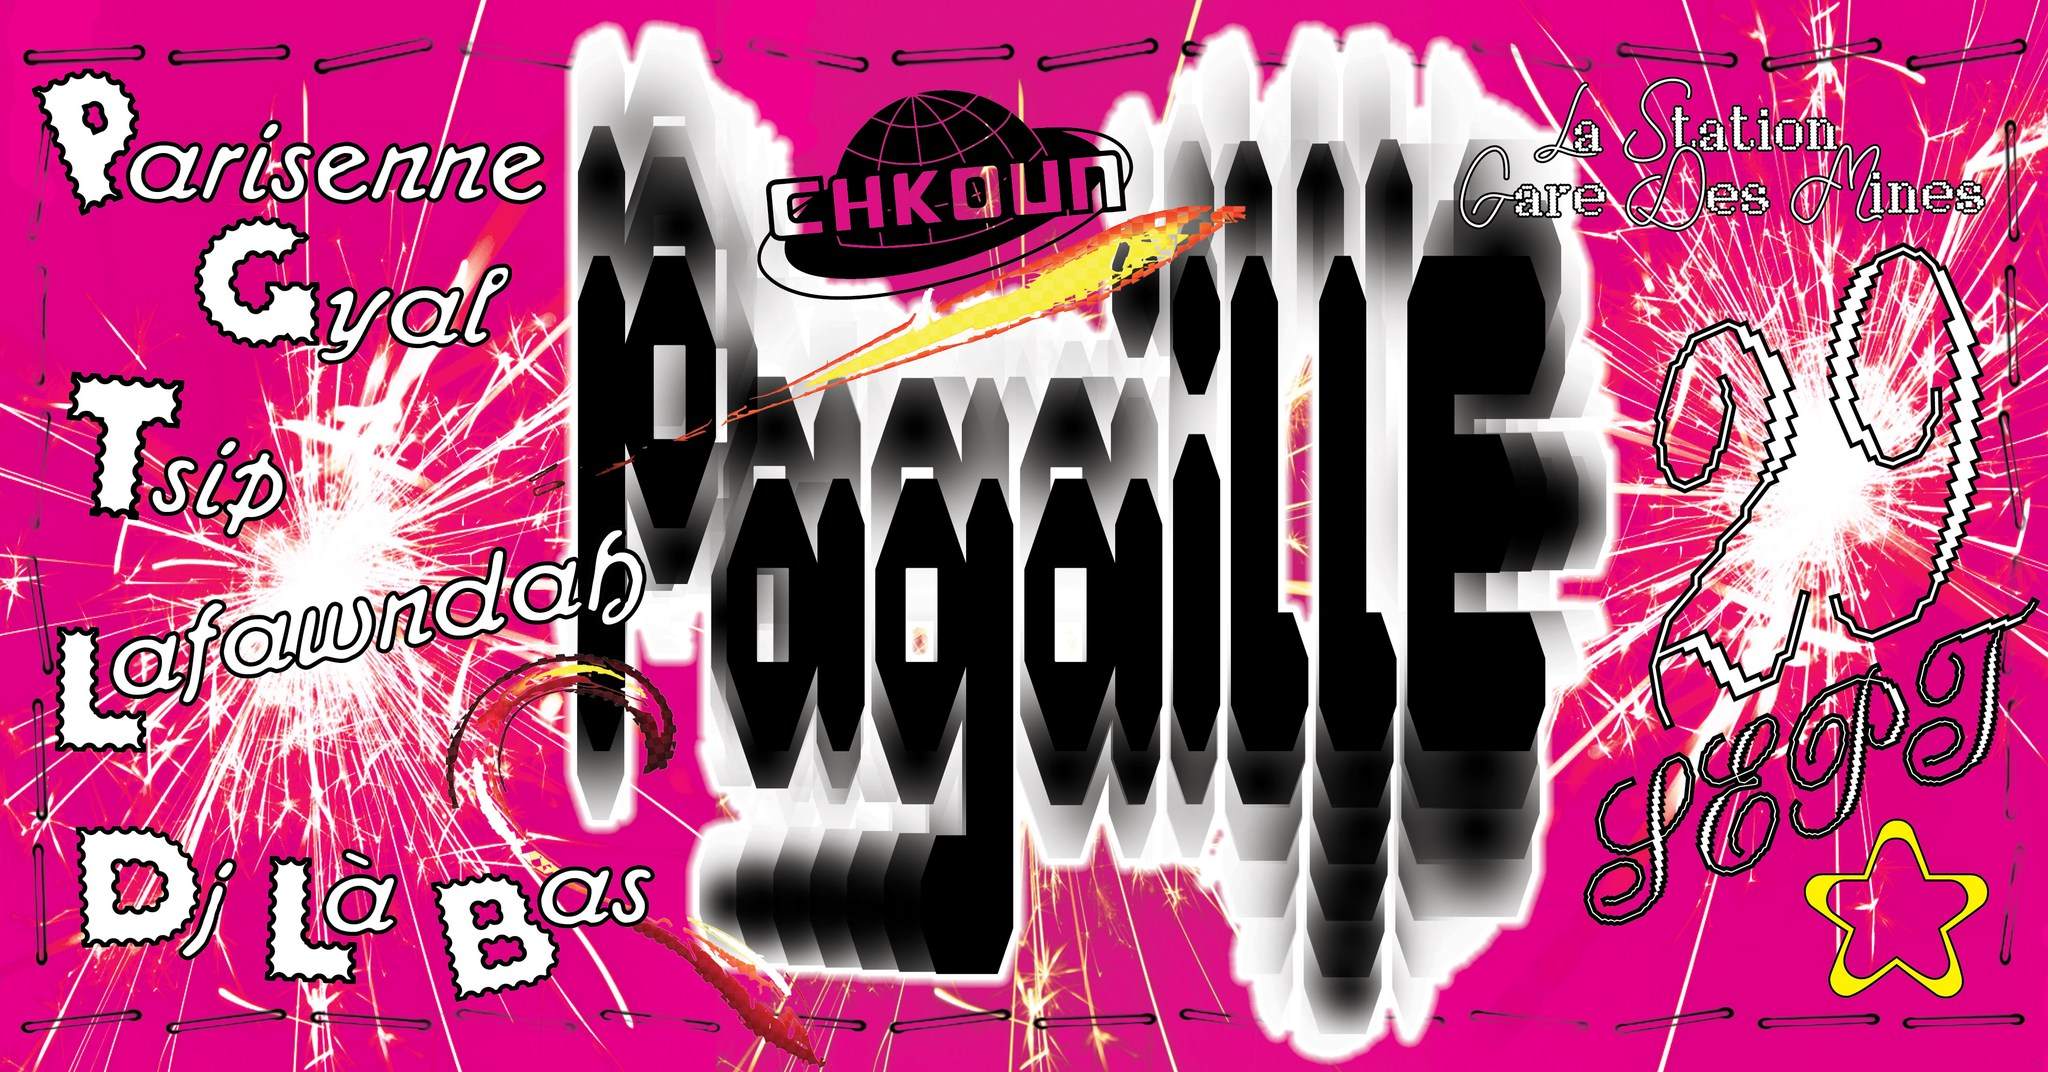 Pagaille x Chkoun is it - フライヤー表